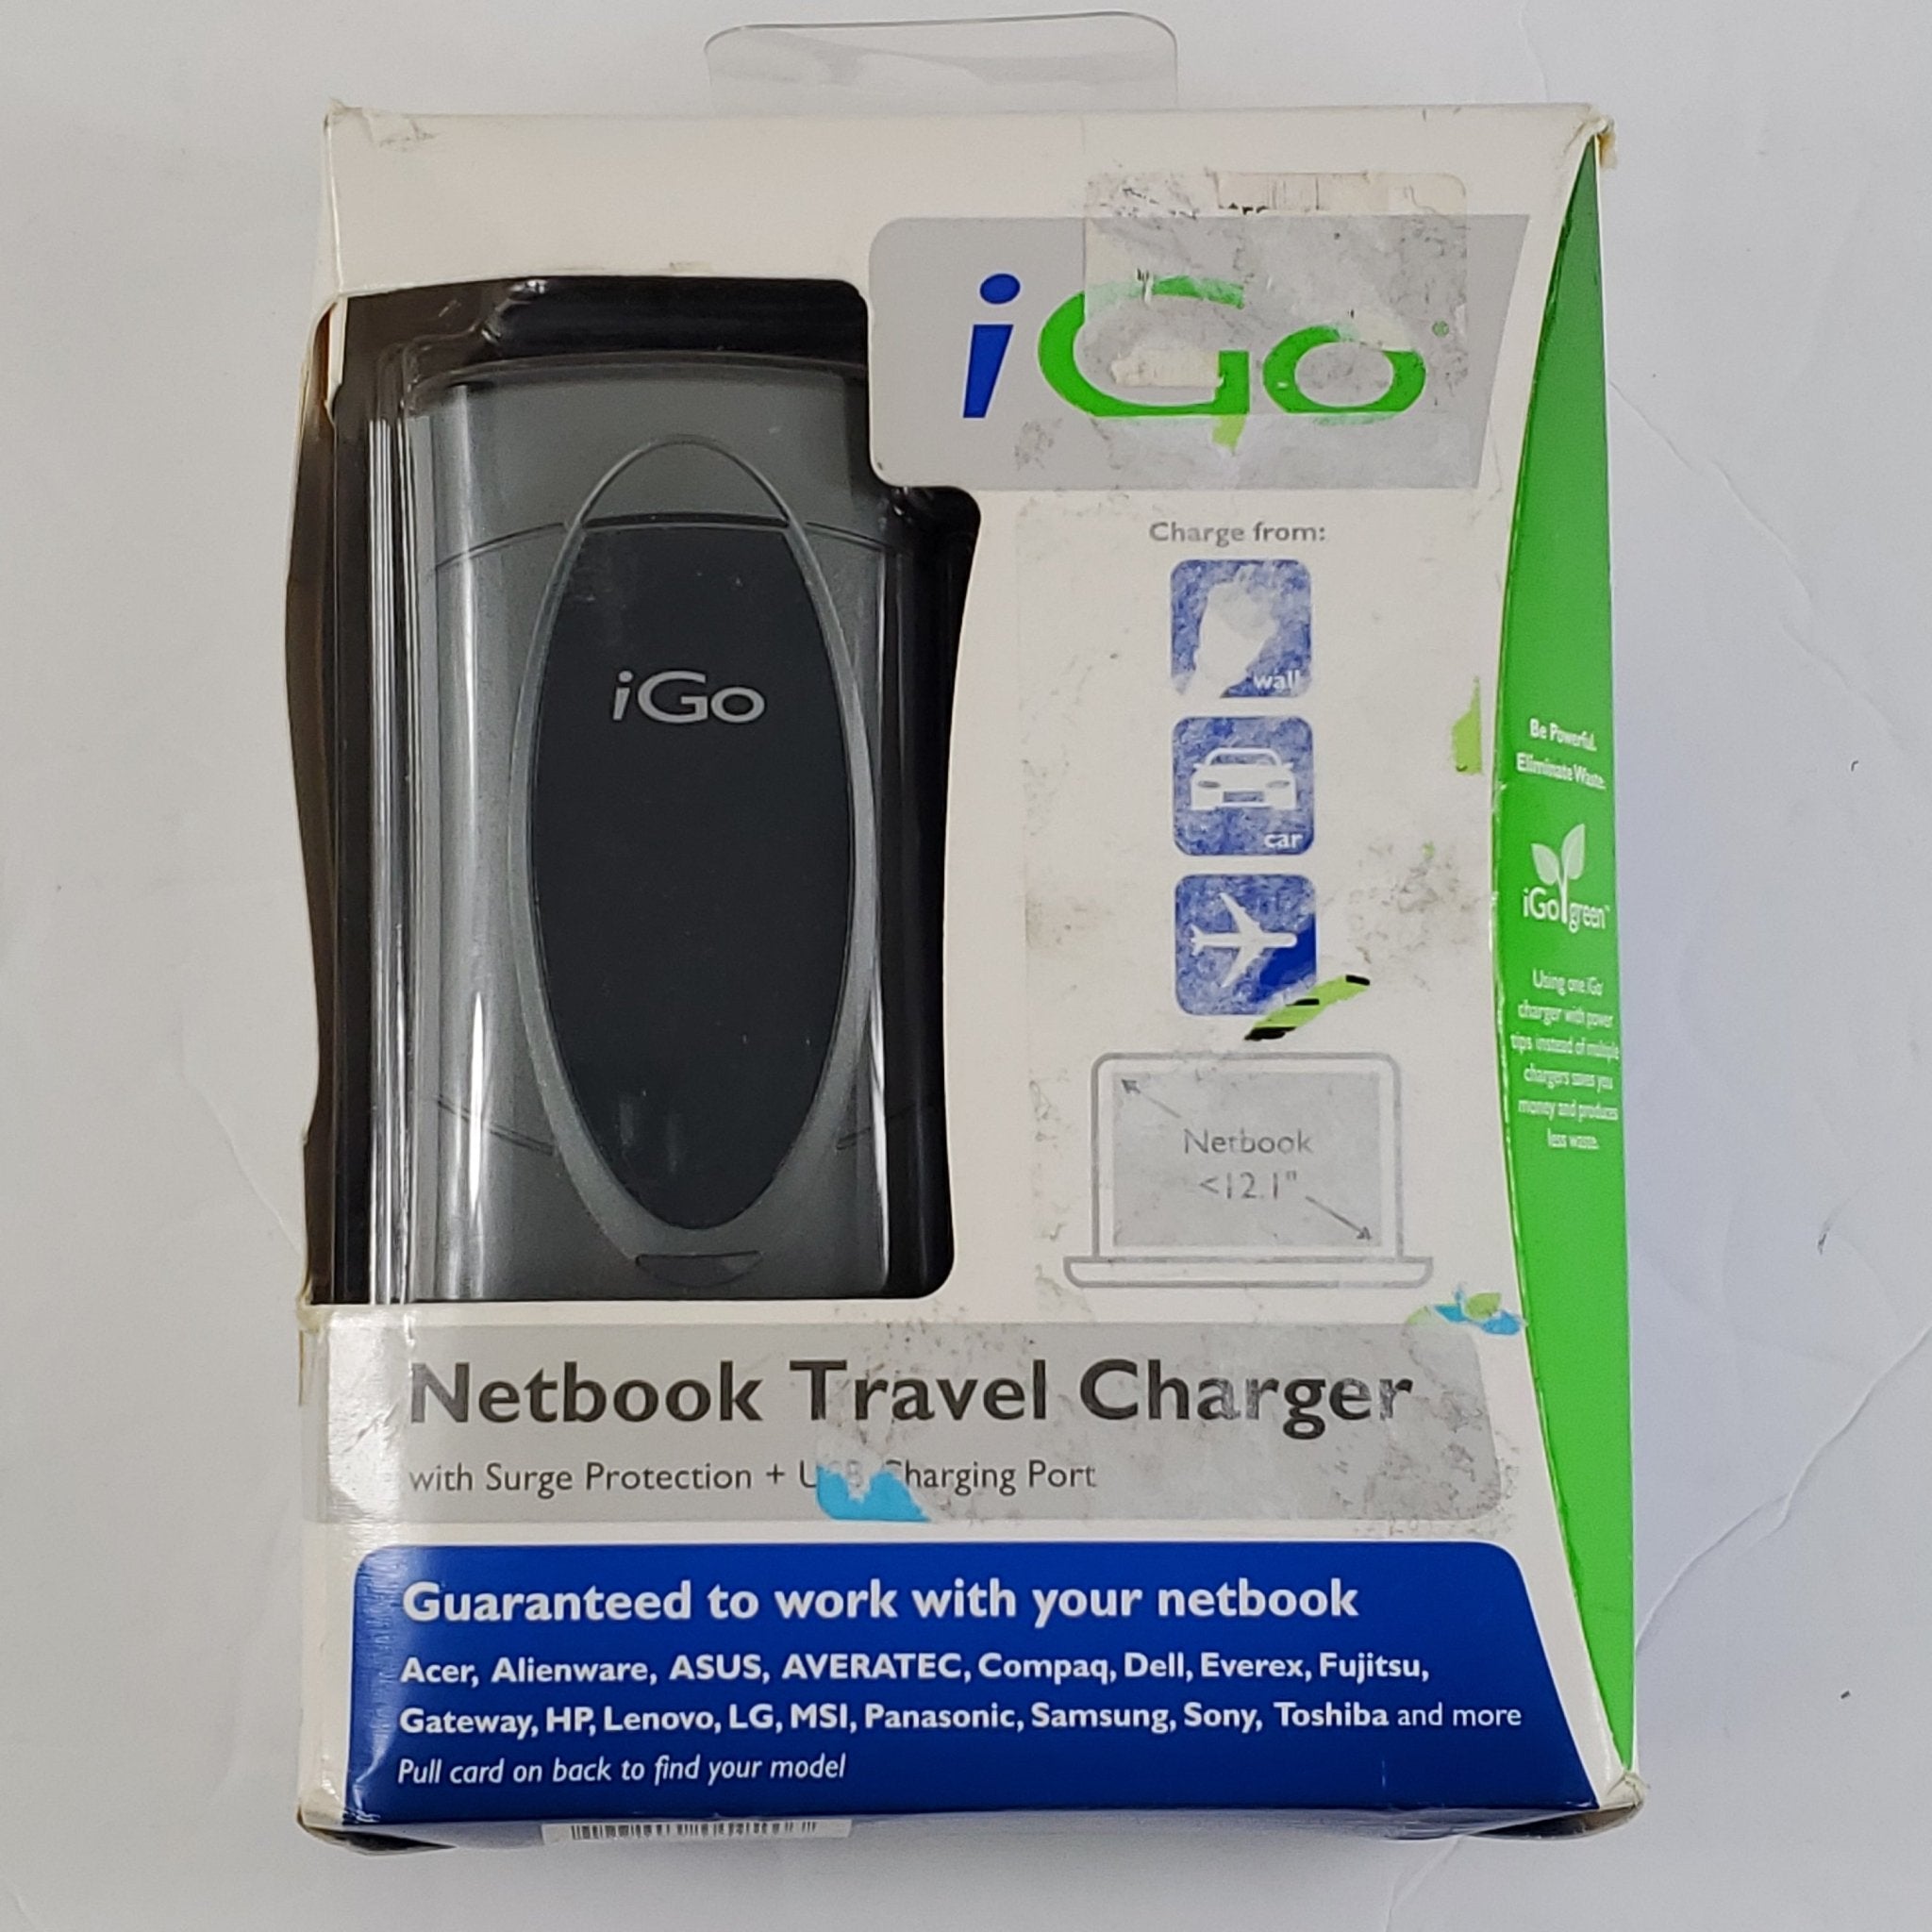 Netbook Travel Charger - Bargainwizz